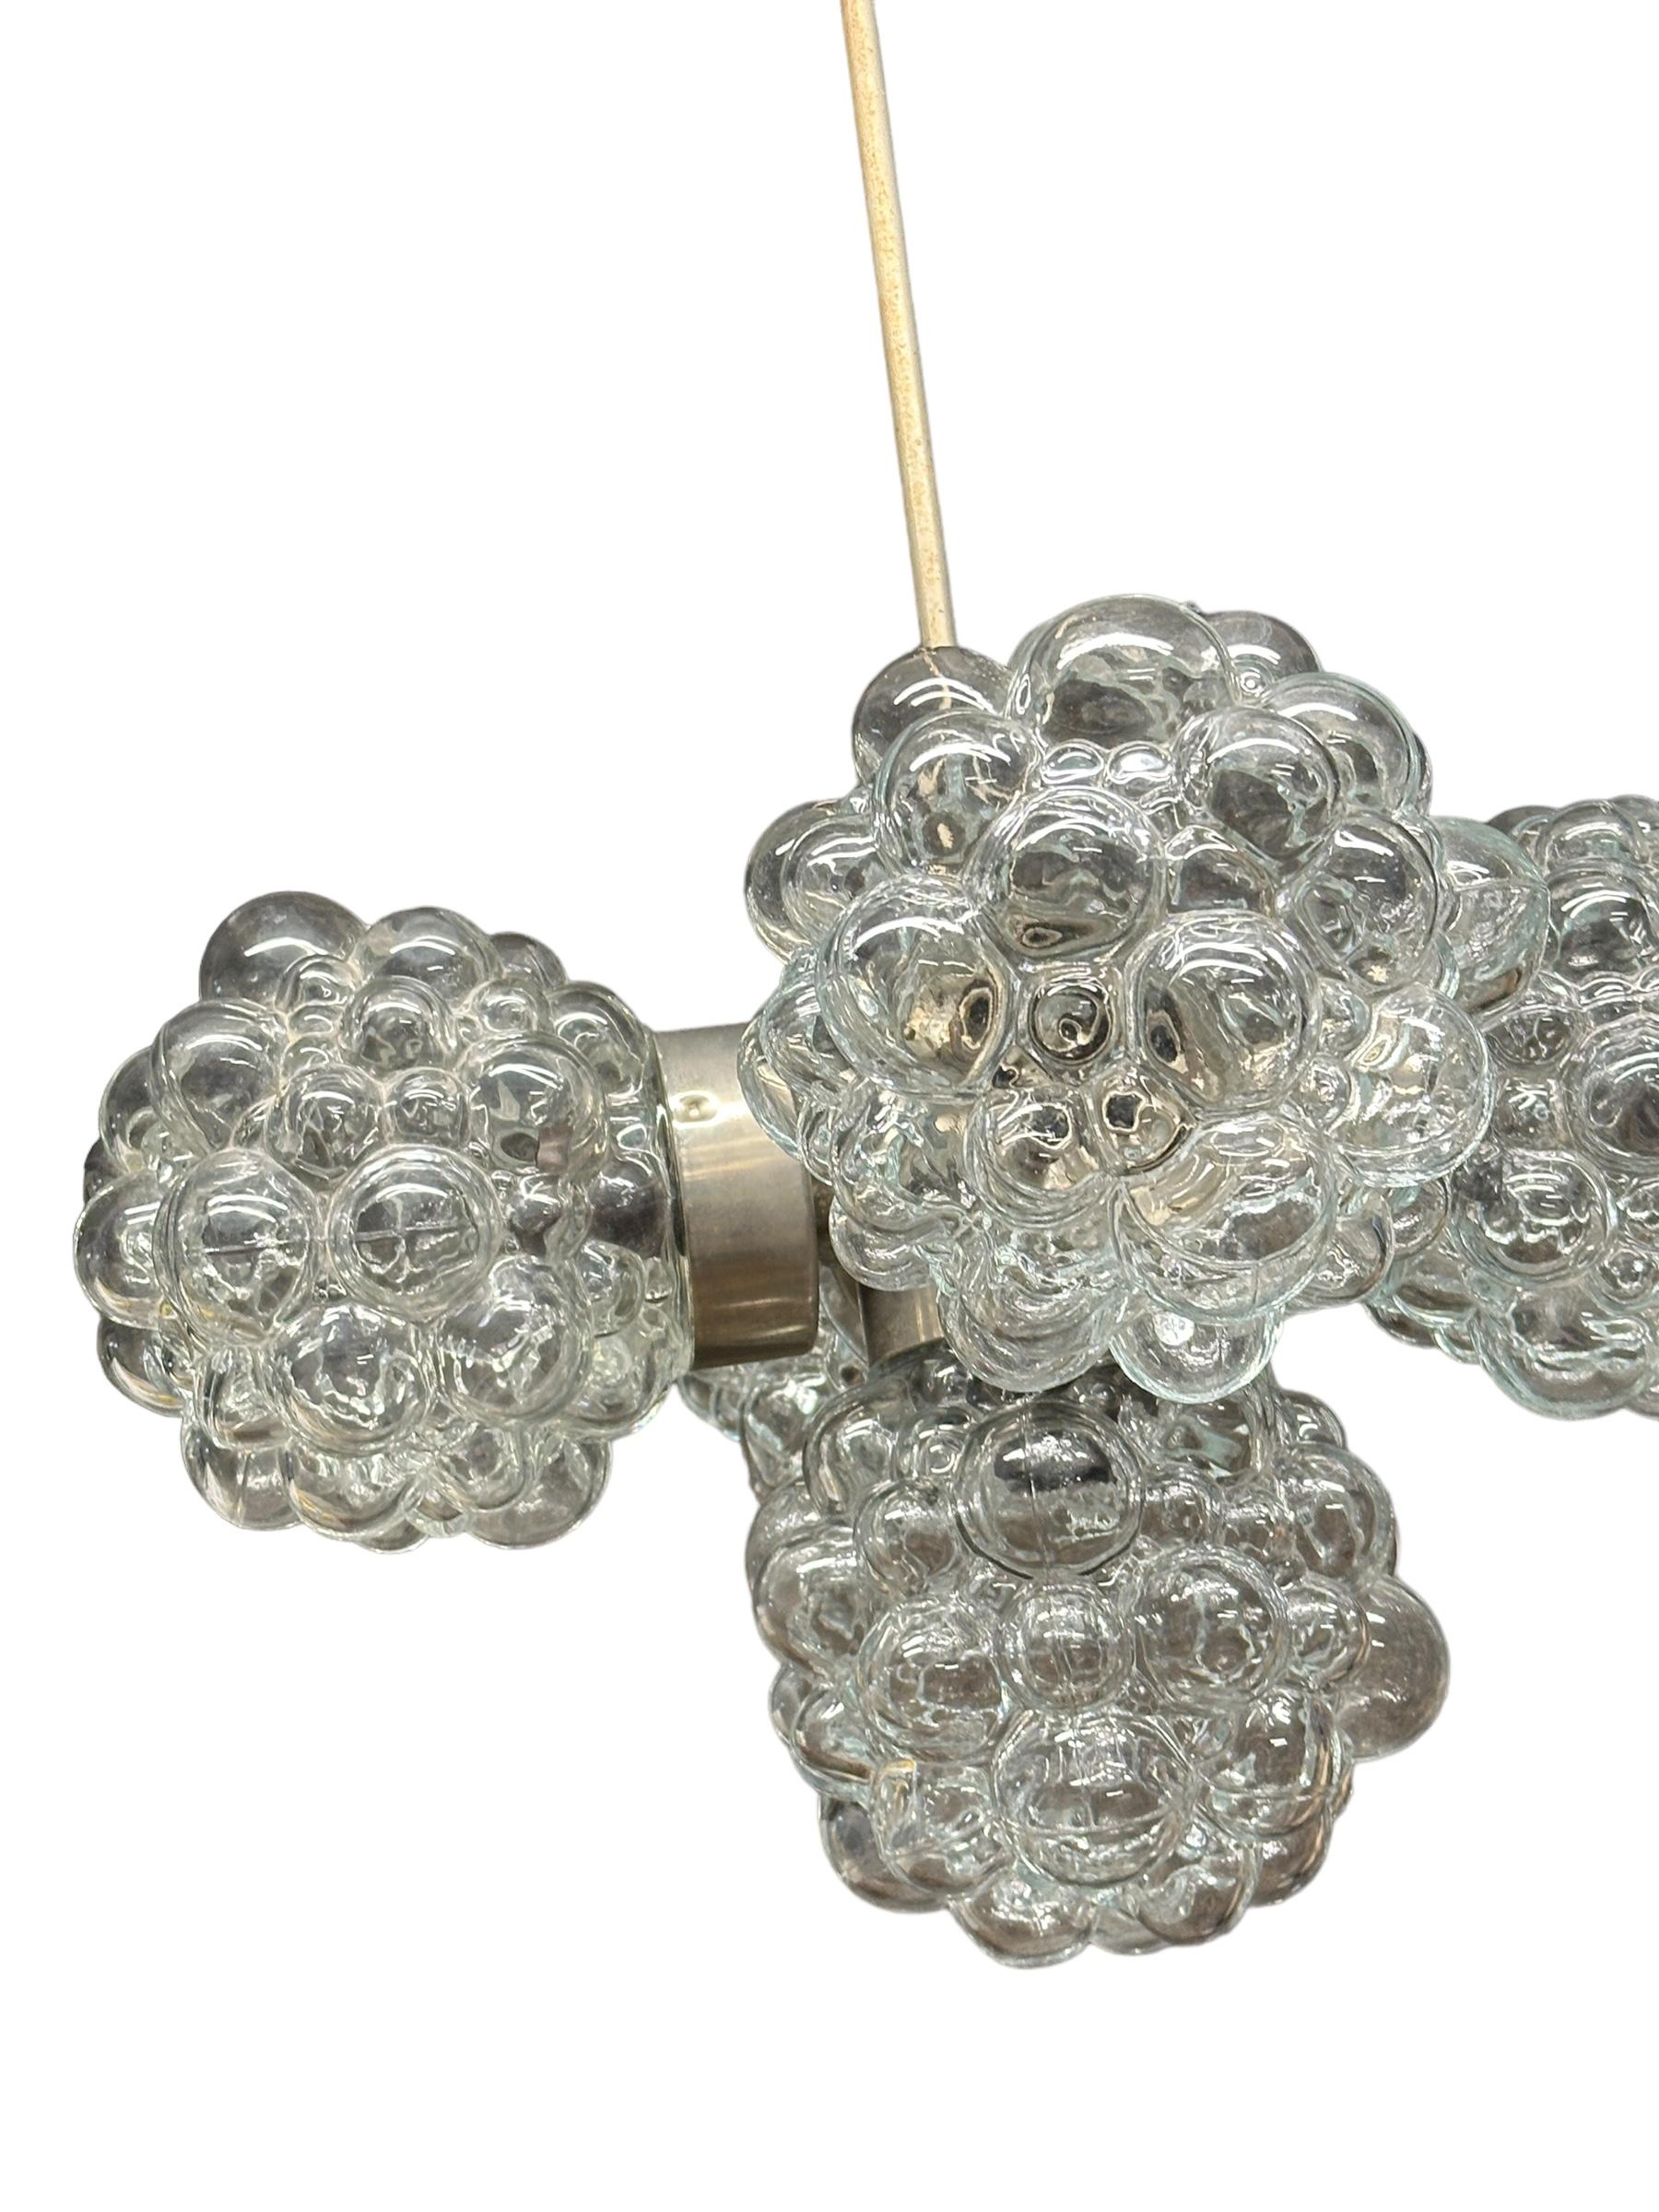 5 Light Bubble Glass Helena Tynell Style Chandelier, Austria 1960s For Sale 4